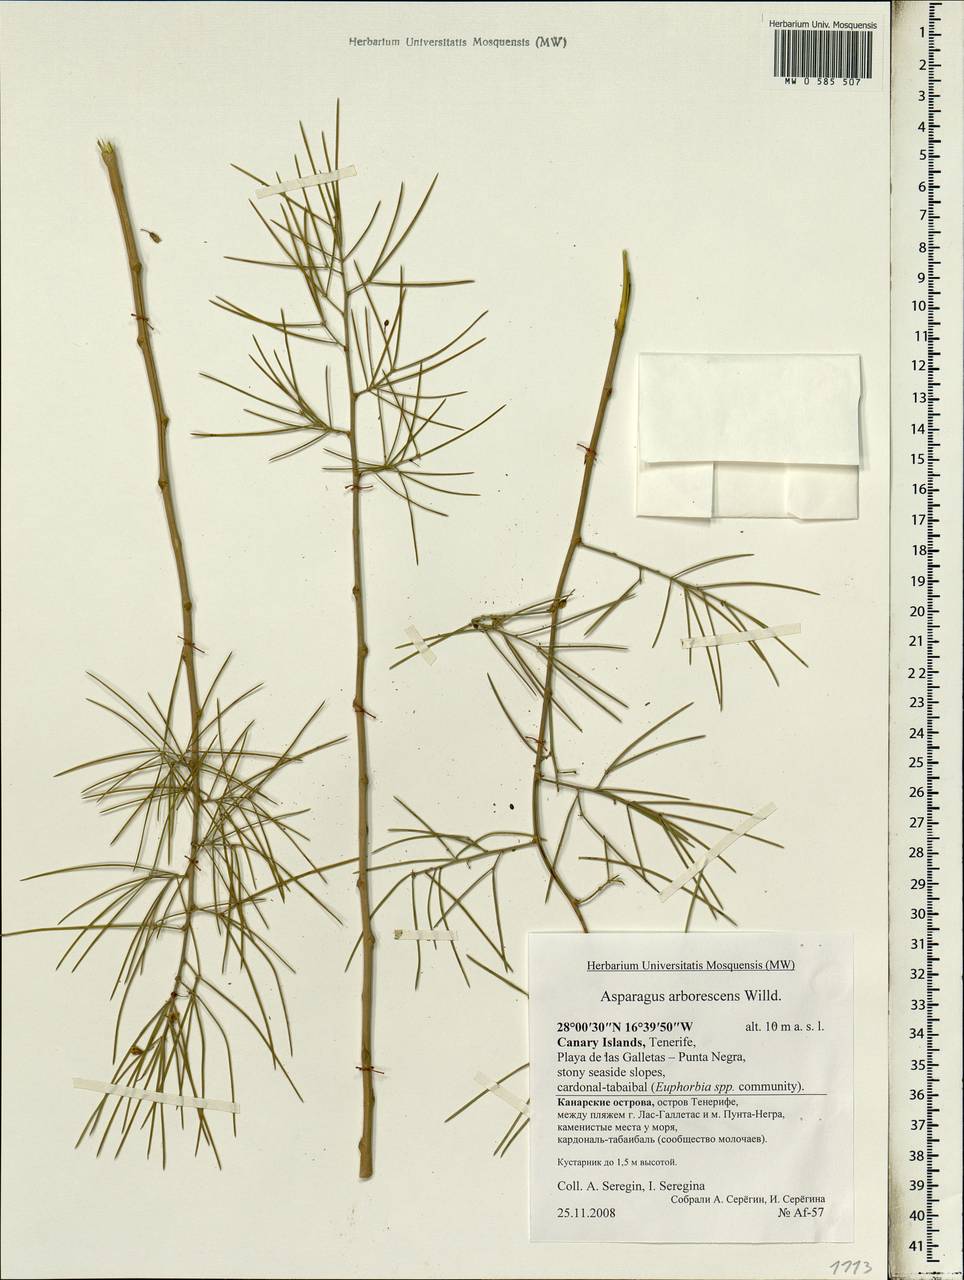 Asparagus arborescens Willd. ex Schult. & Schult.f., Африка (AFR) (Испания)